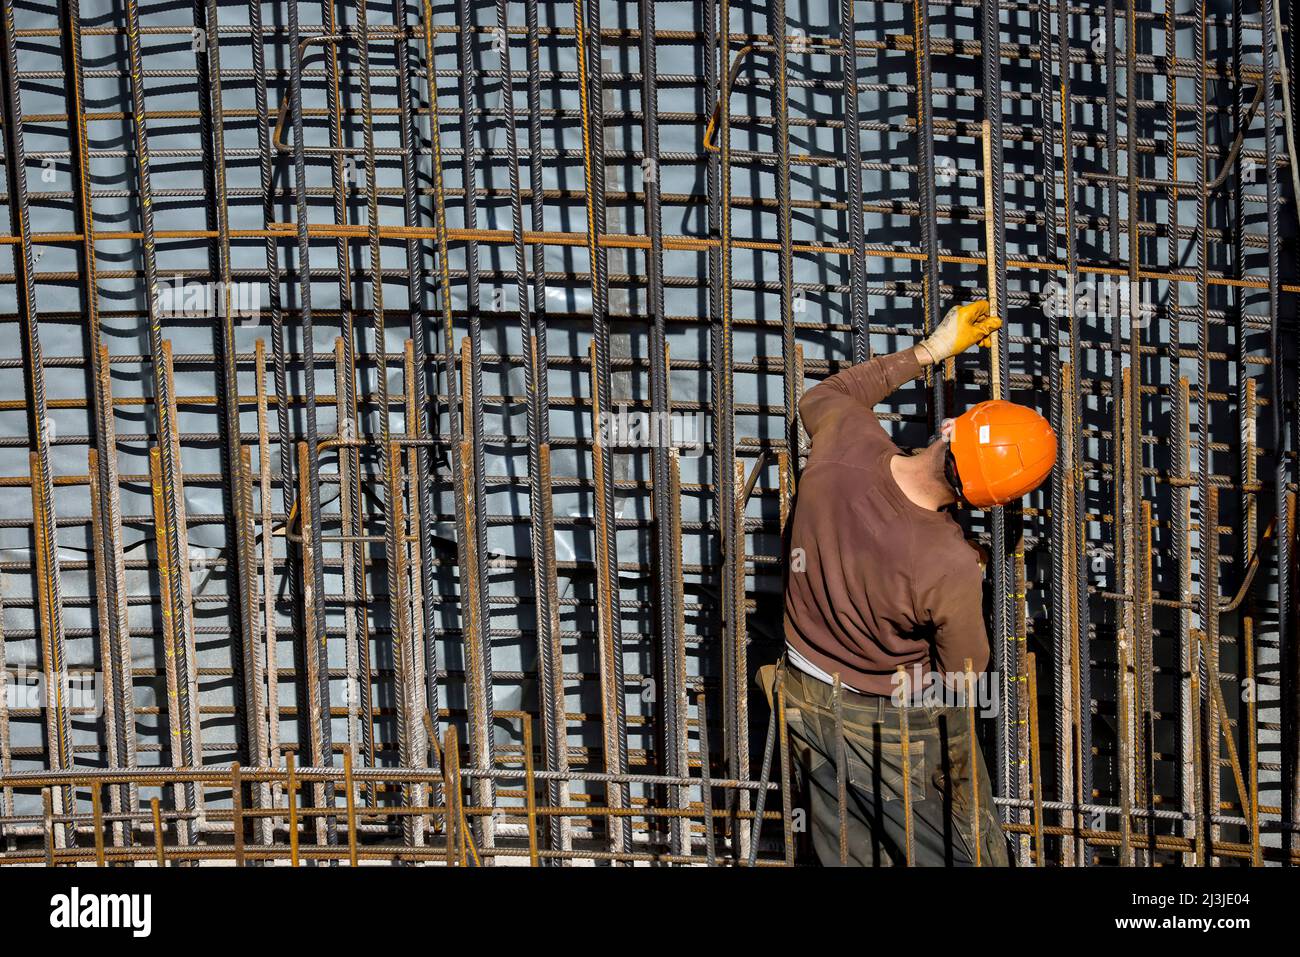 Construction industry, construction worker working on a construction site, Essen, North Rhine-Westphalia, Germany Stock Photo